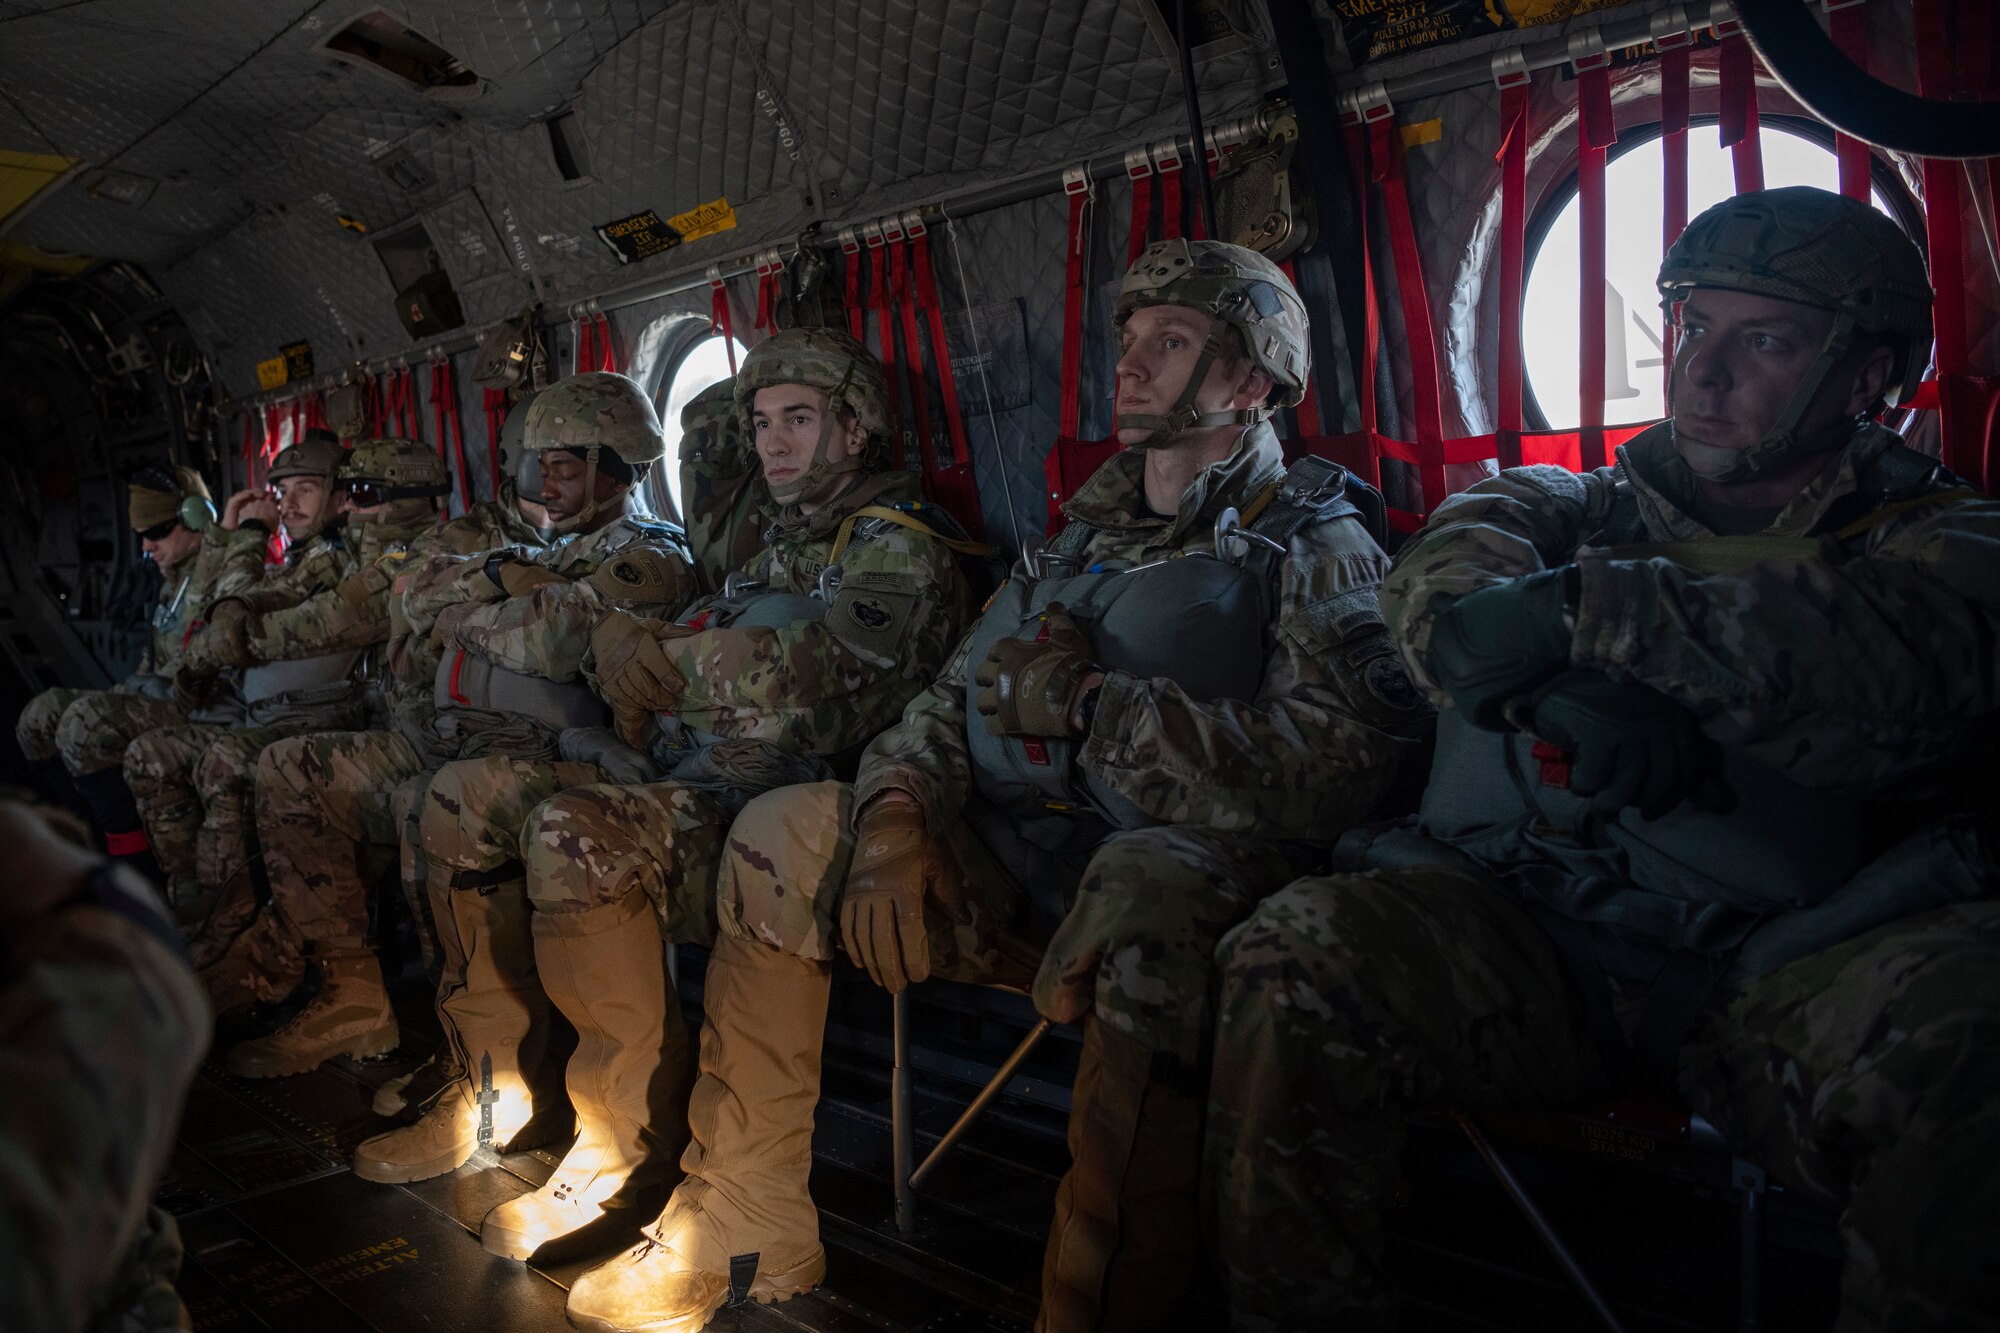 A photo of soldiers and airmen riding on a helicopter